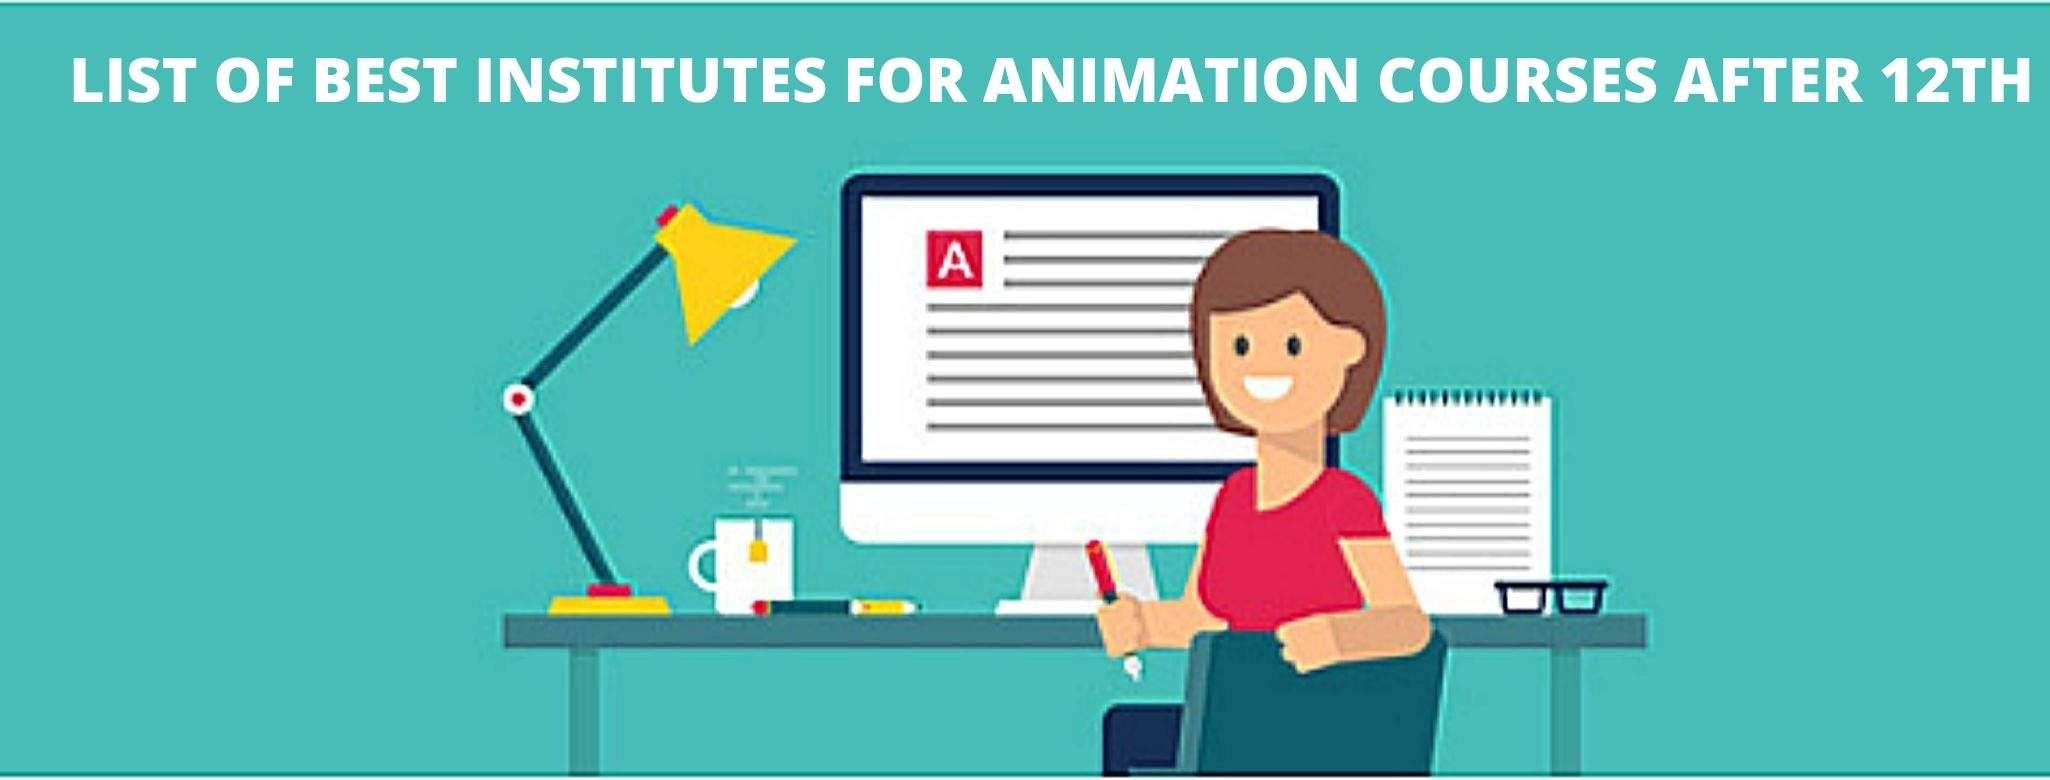 What is the minimum percentage in Class 10 to take admission in animation college?